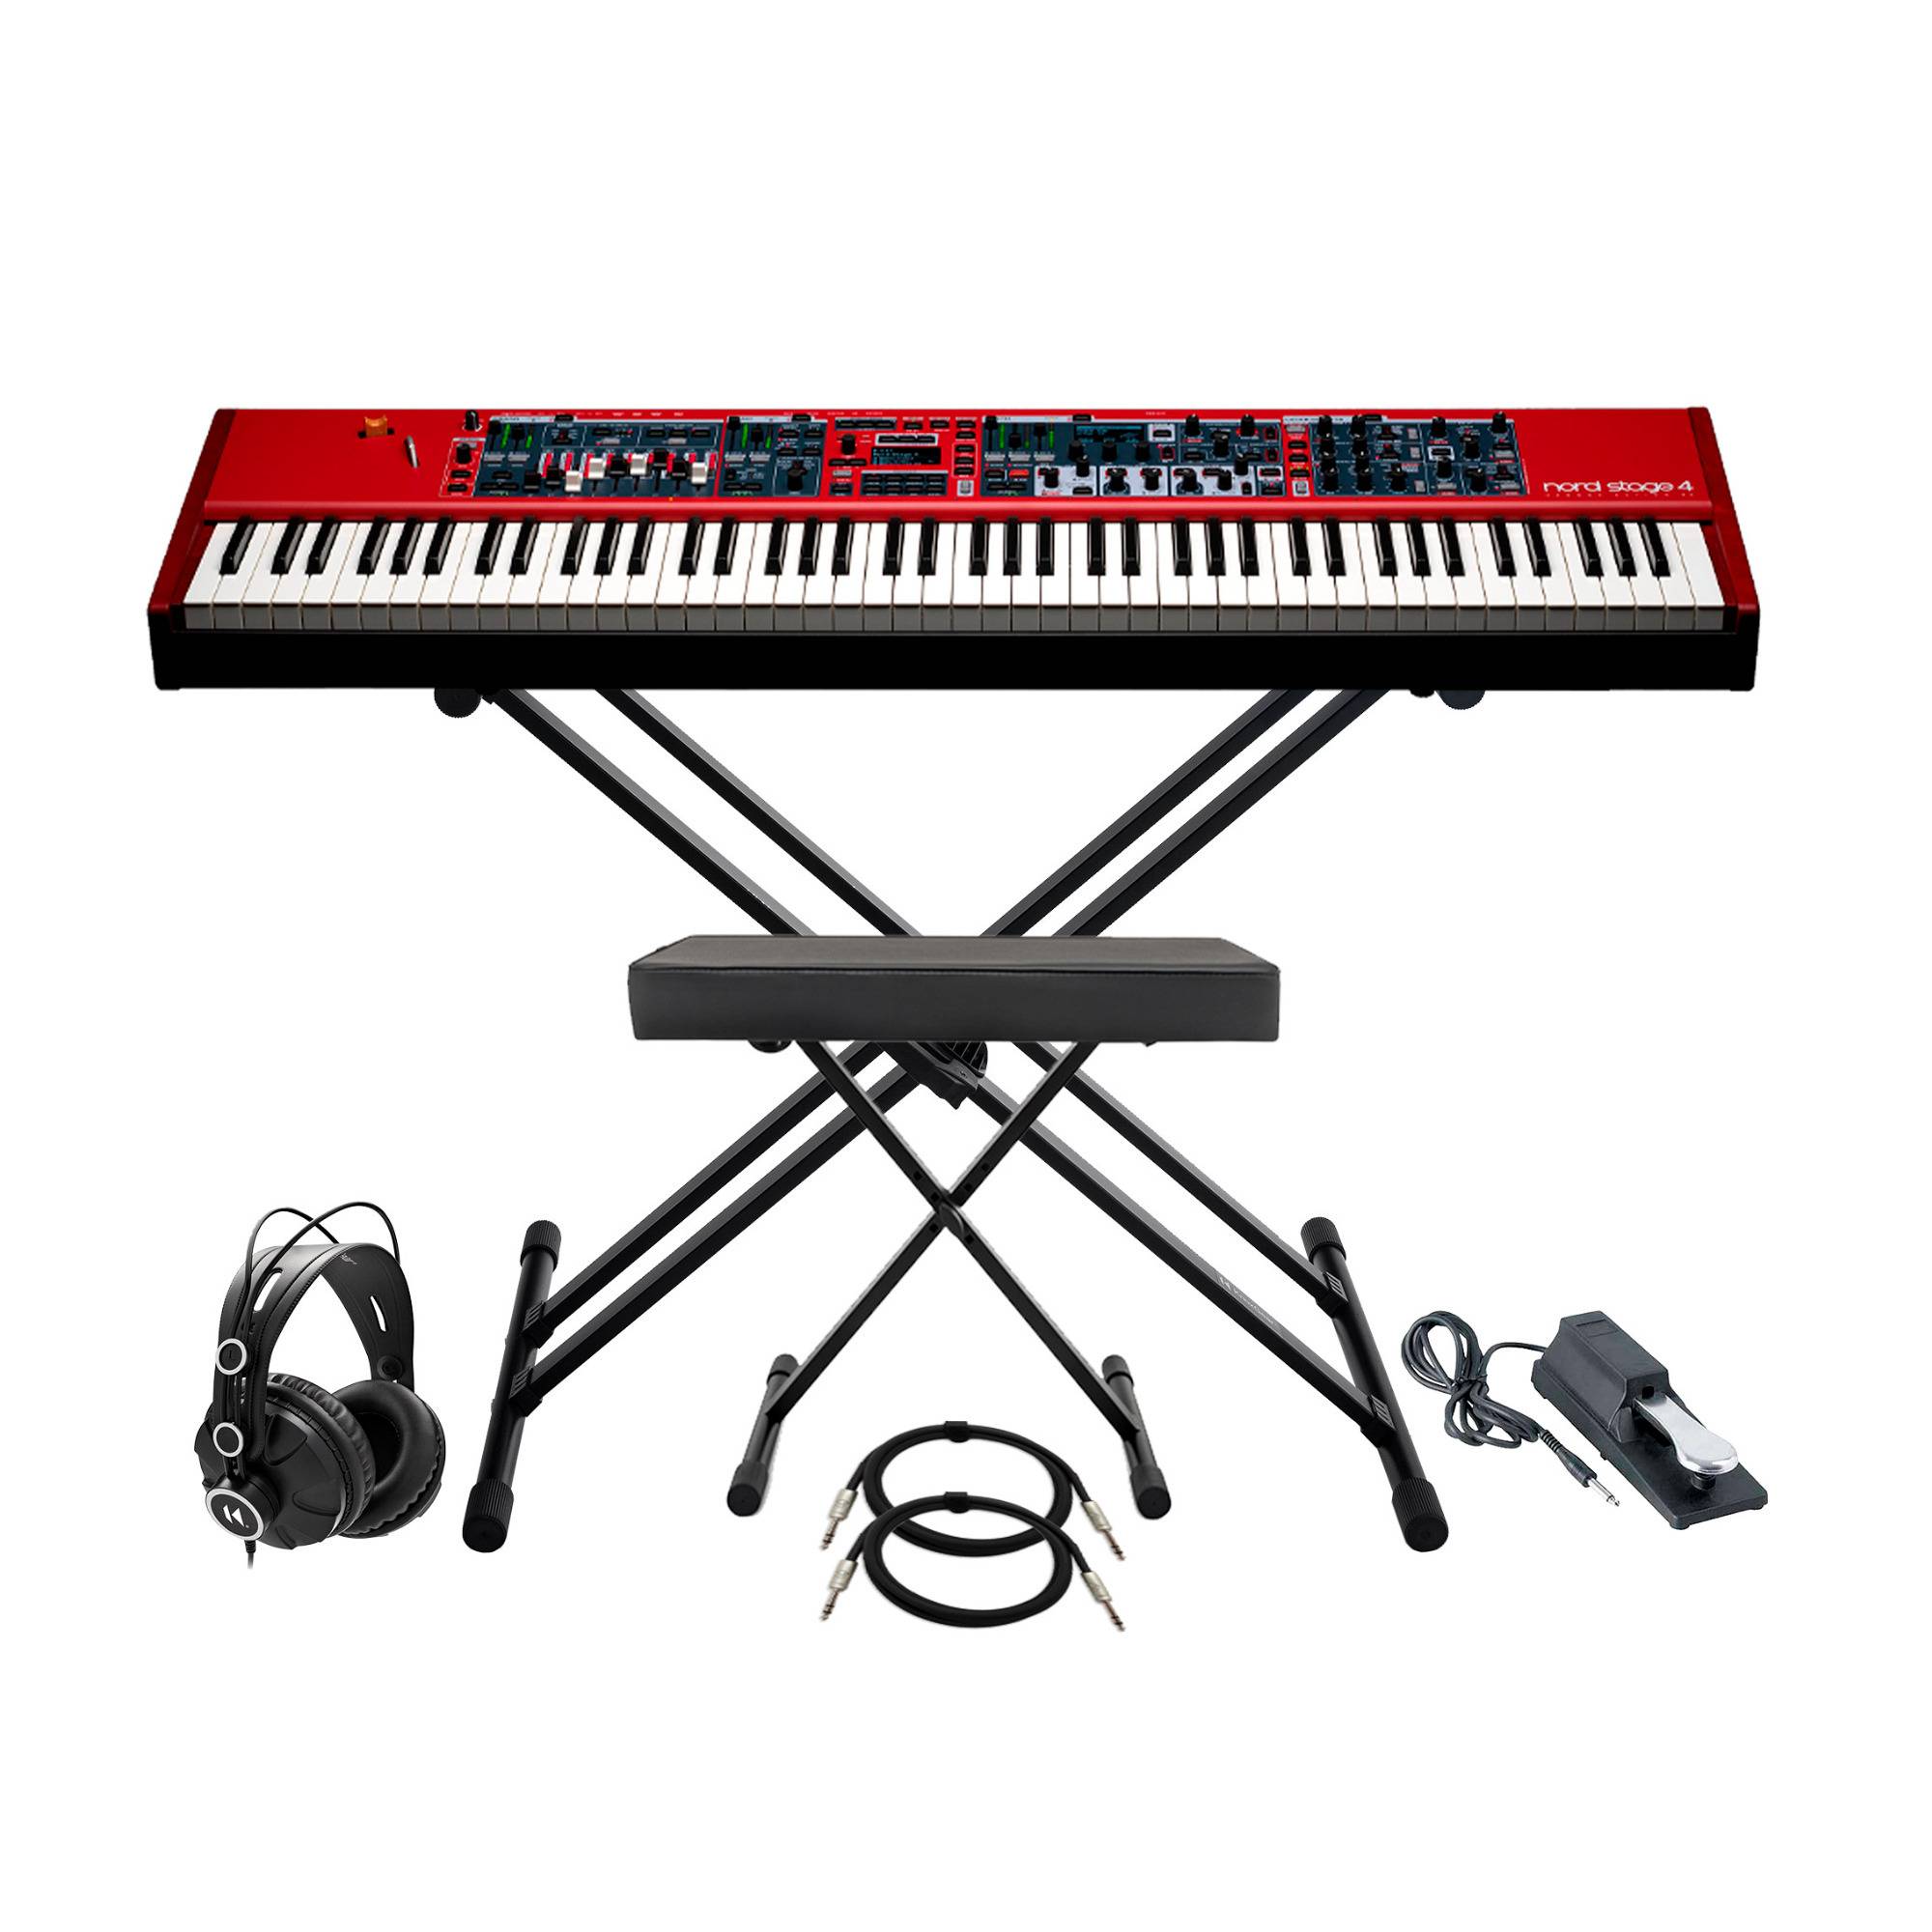 Nord Stage 4 88 88-Key Fully-Weighted Keyboard with Stand, Adjustable Bench and Sustain Pedal